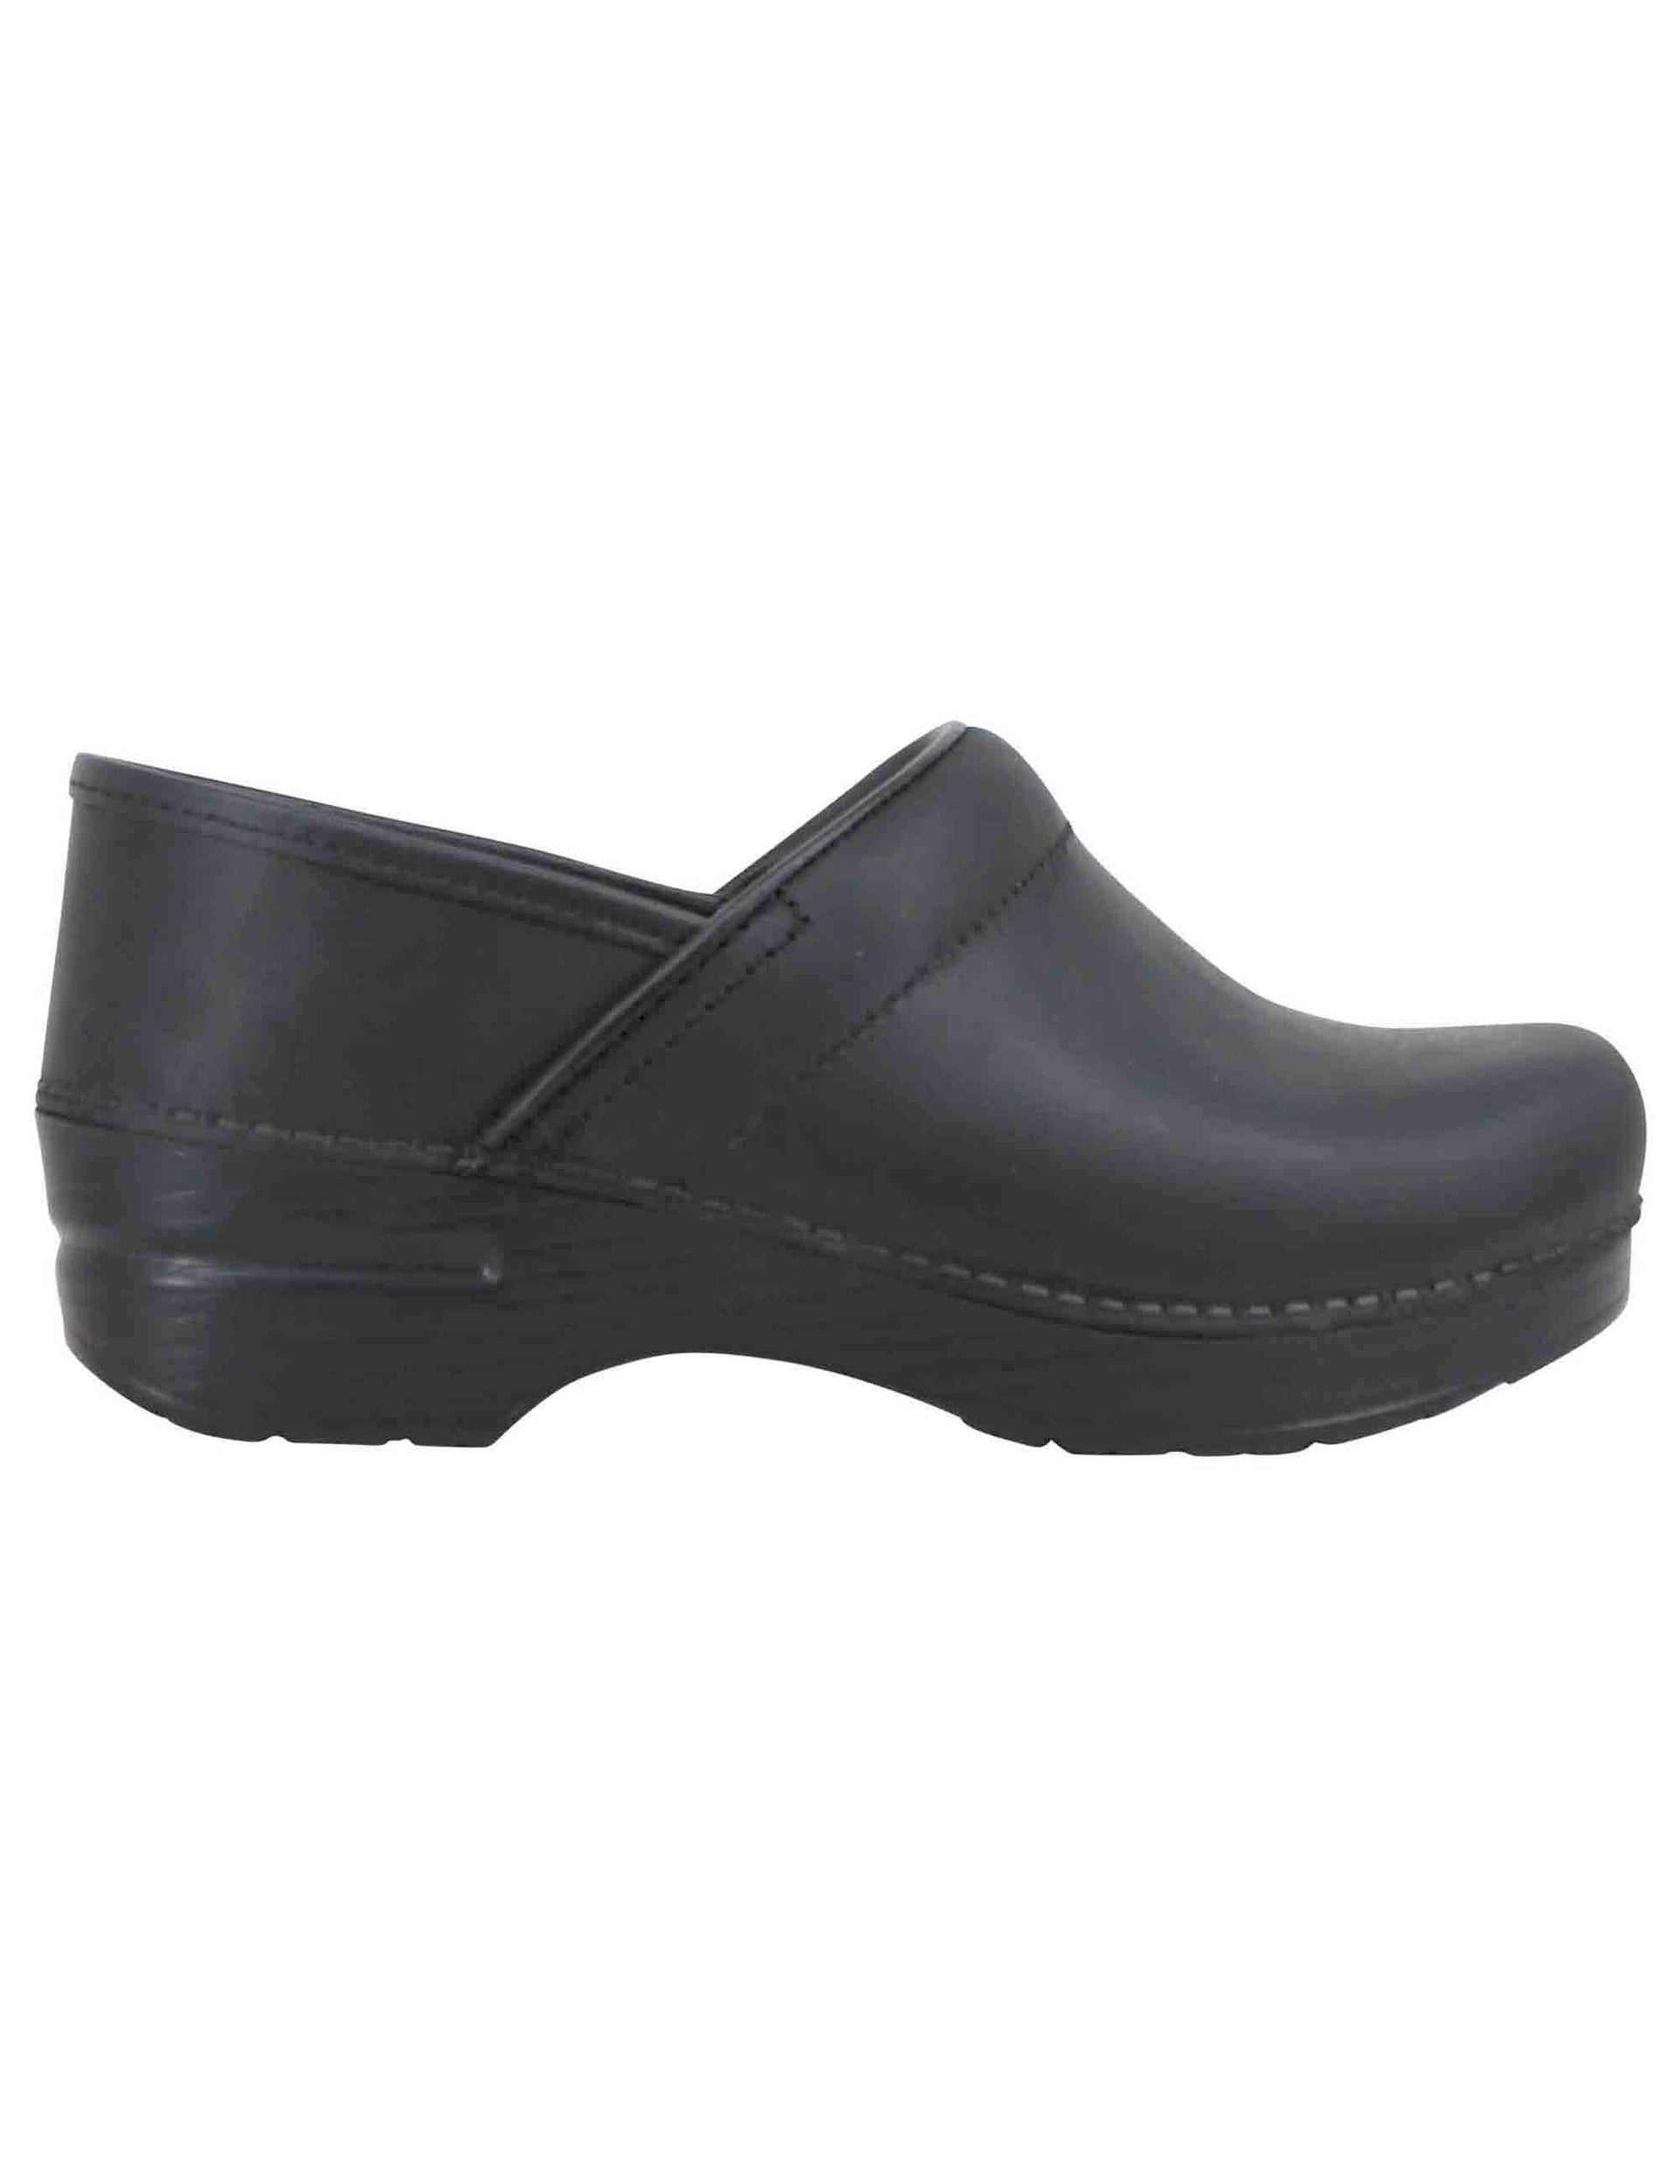 Professional women's clogs in black leather